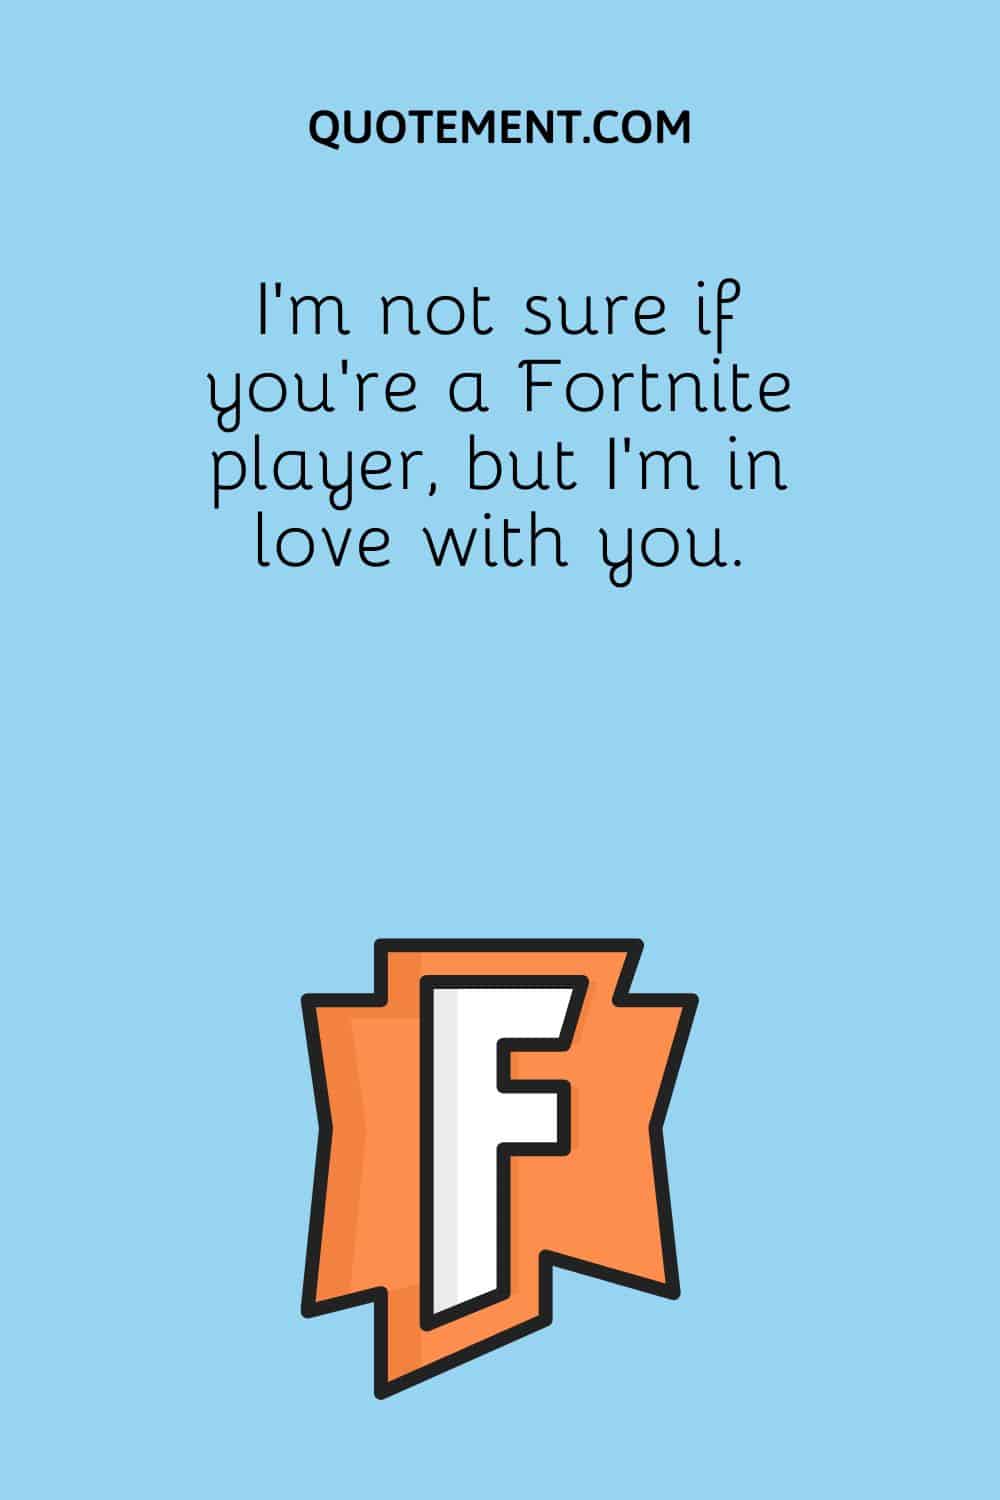 I'm not sure if you're a Fortnite player, but I'm in love with you